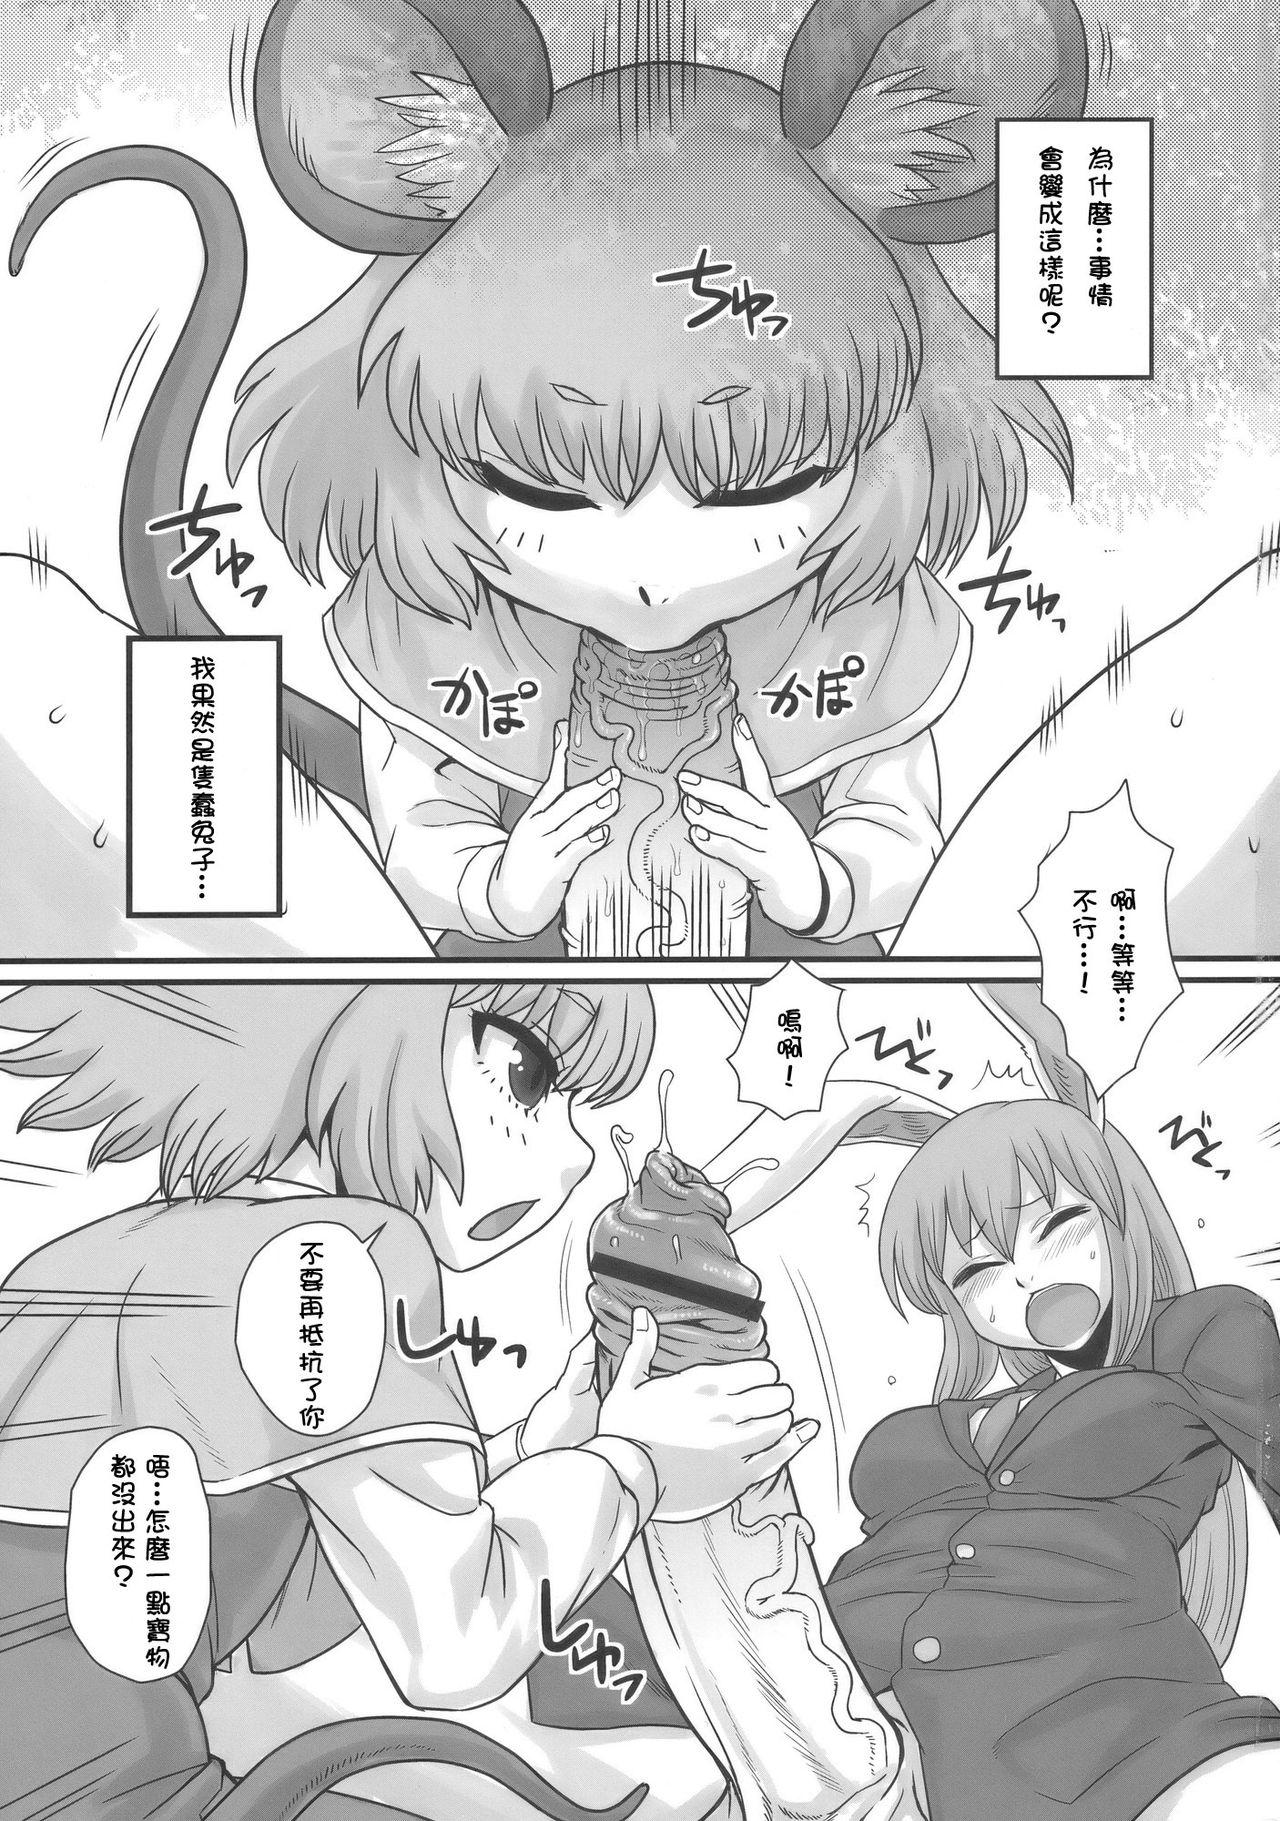 Behind Lunatic Udon - Touhou project Gay Skinny - Page 3